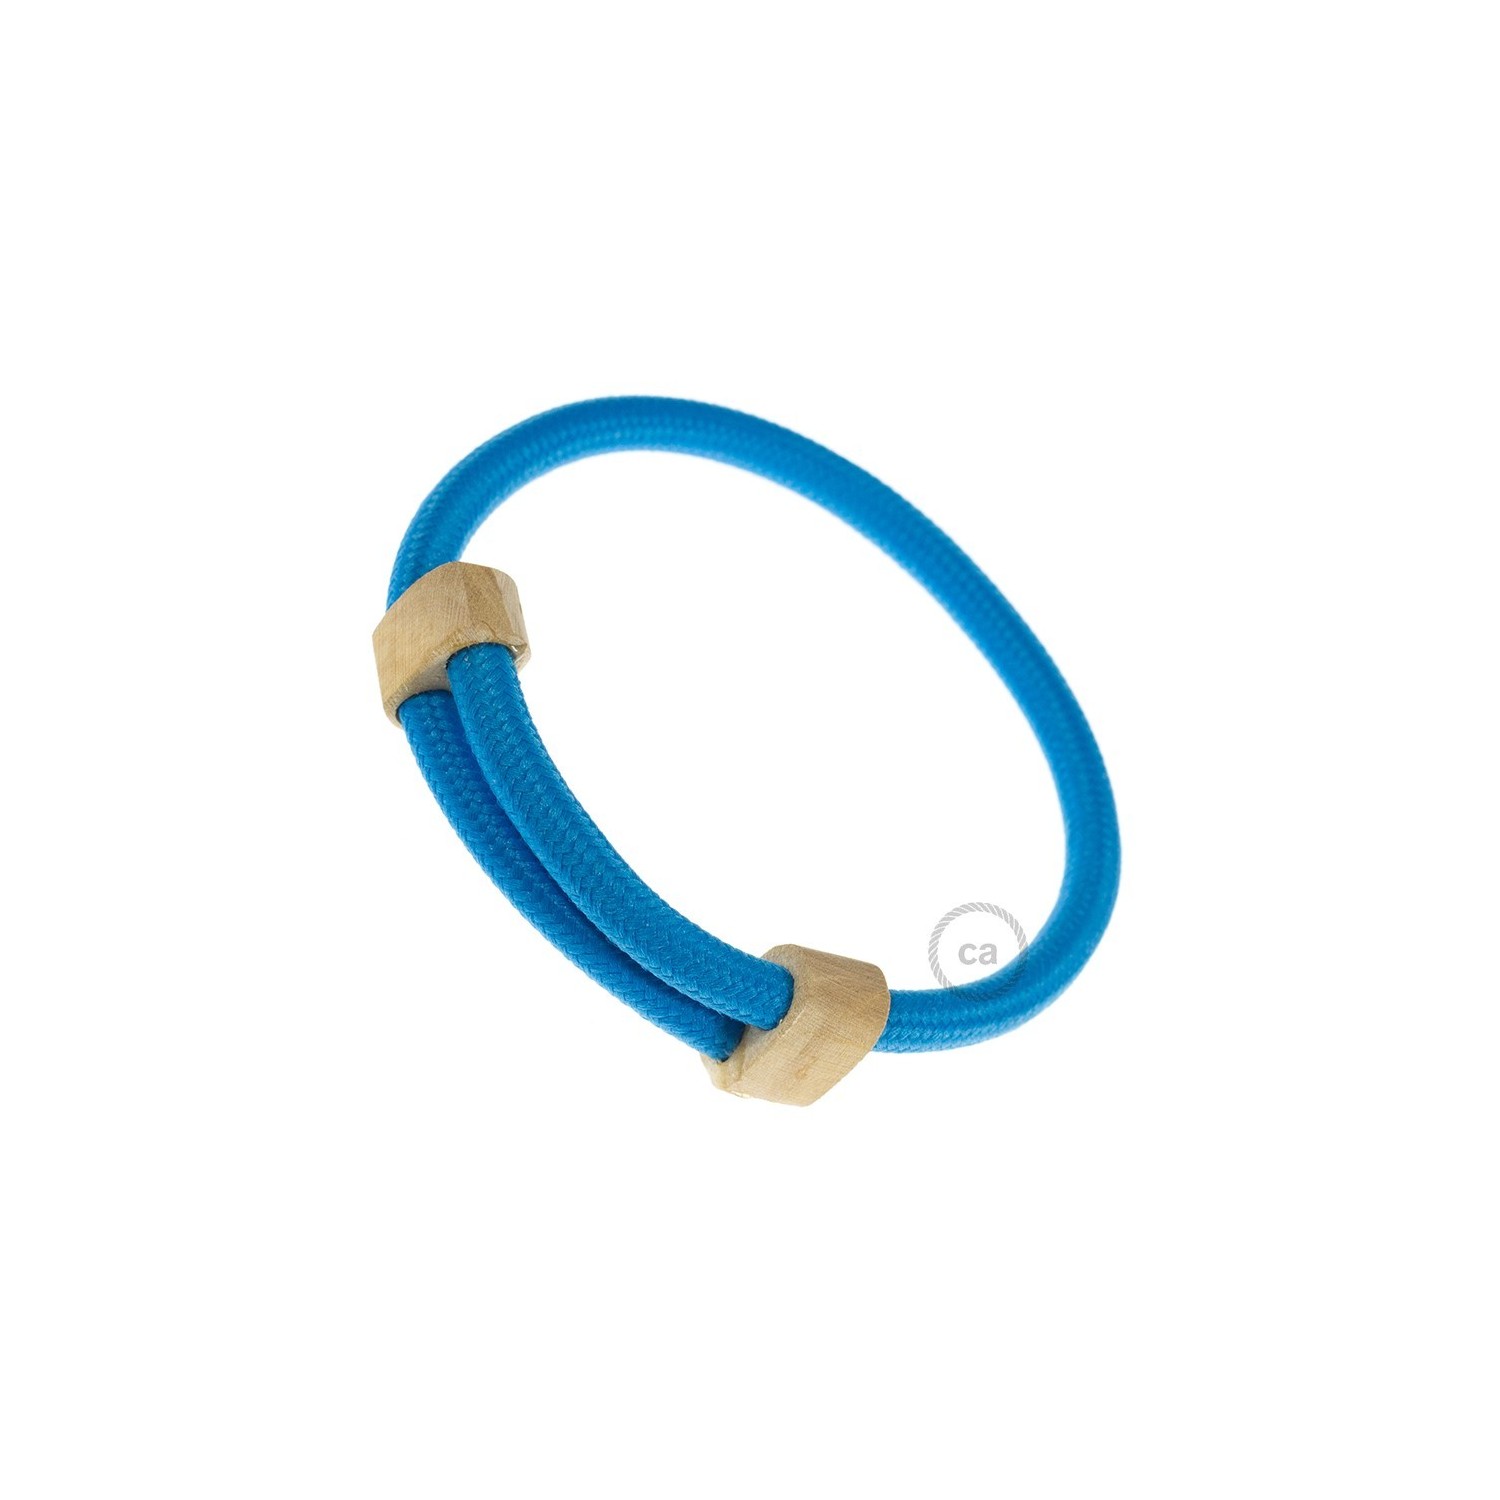 Creative-Bracelet in Rayon solid color turquoise fabric RM11. Wood sliding fastening. Made in Italy.